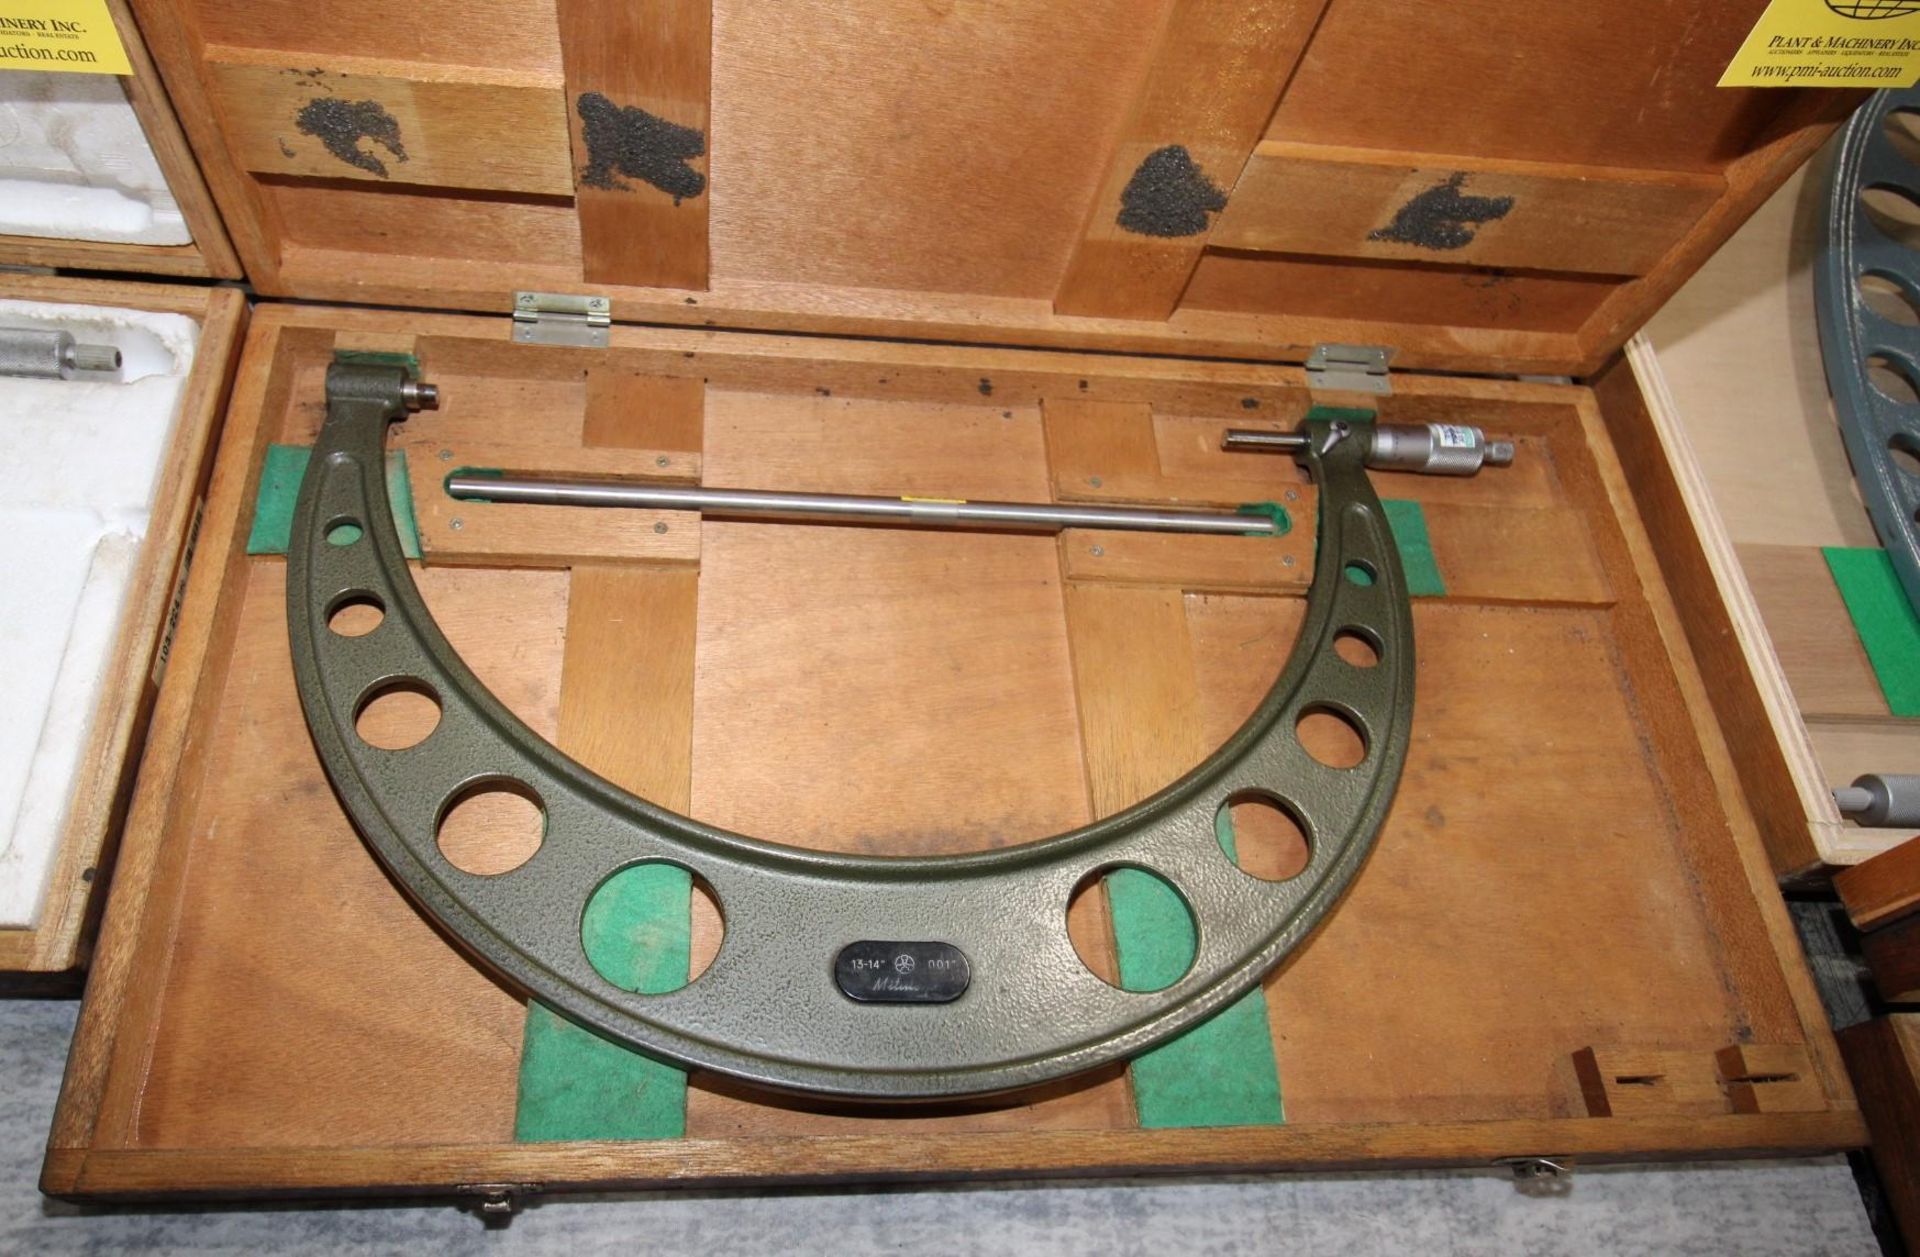 OUTSIDE MICROMETER, MITUTOYO MDL. 103-190, 13 to 14" range, .001"/ 0.01 mm resolution, w/ ratchet - Image 2 of 2